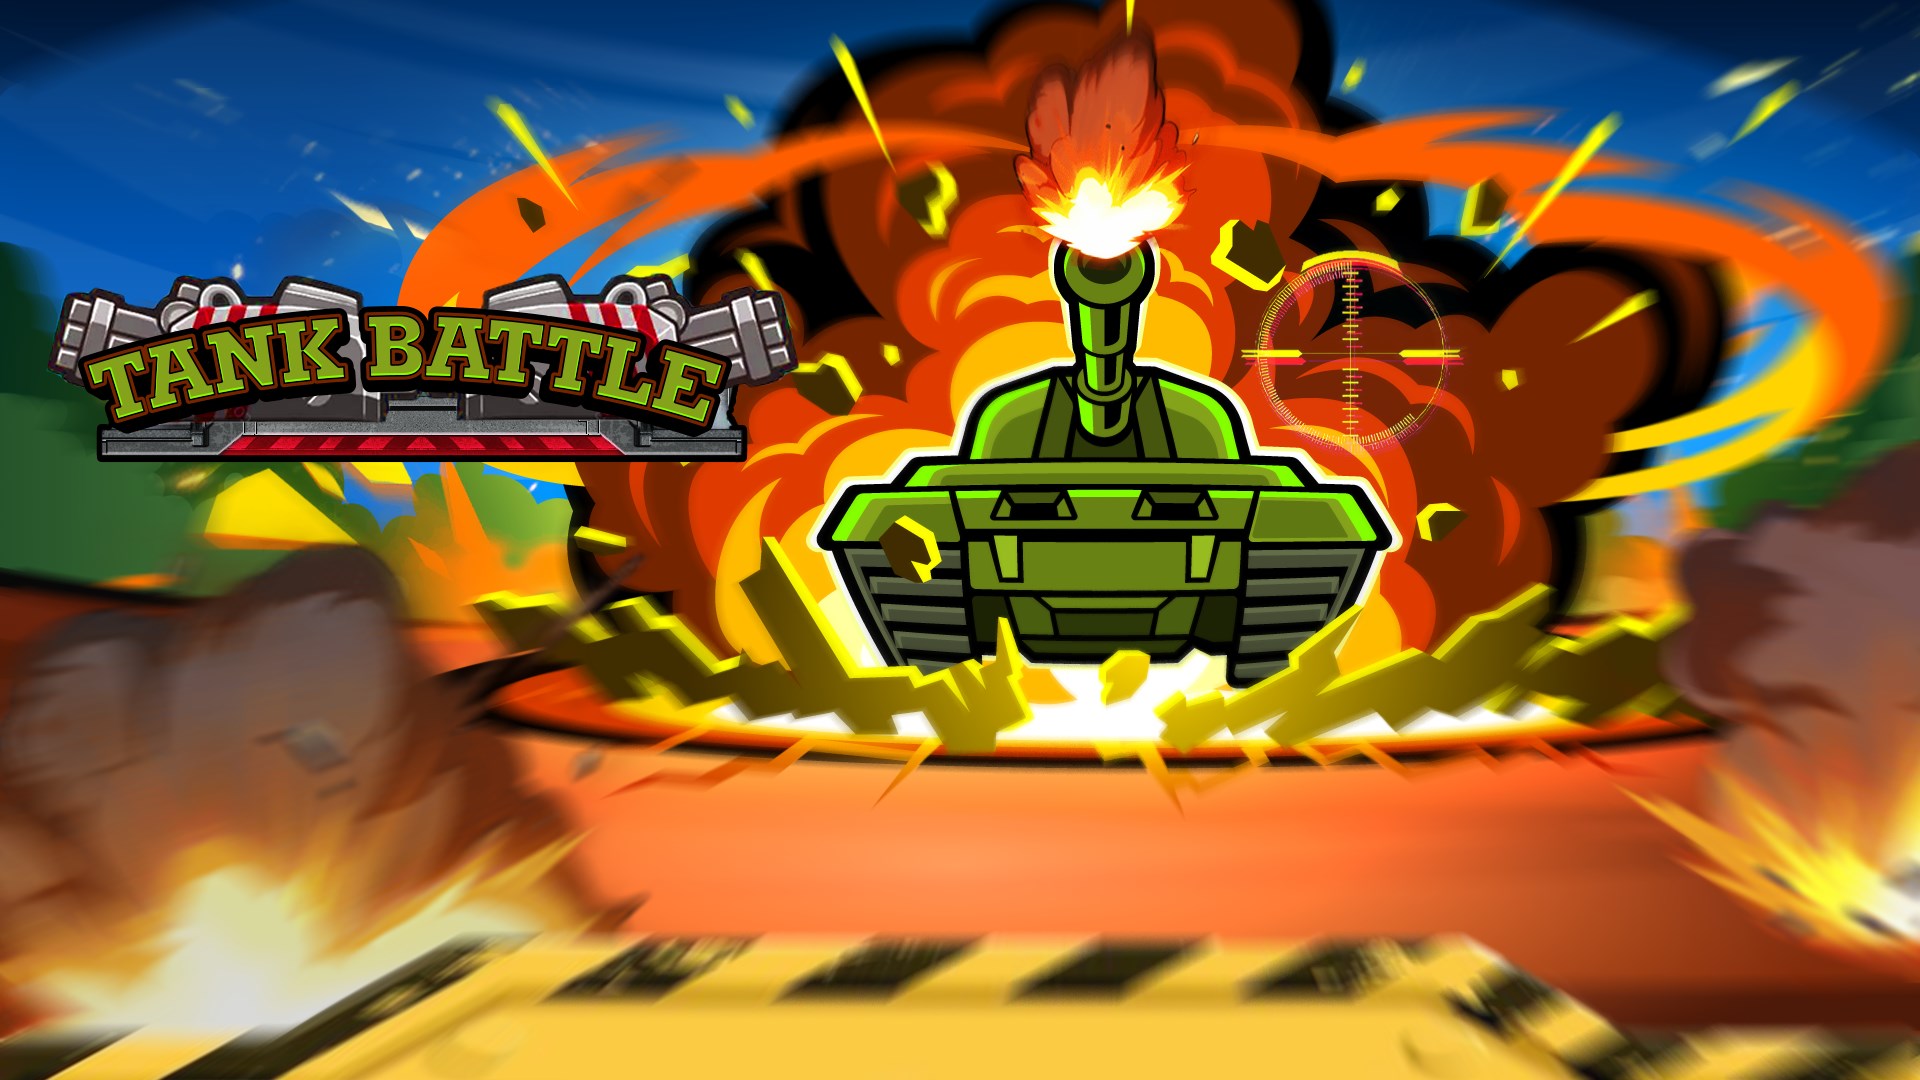 2 Player Tank Battle: Play 2 Player Tank Battle for free